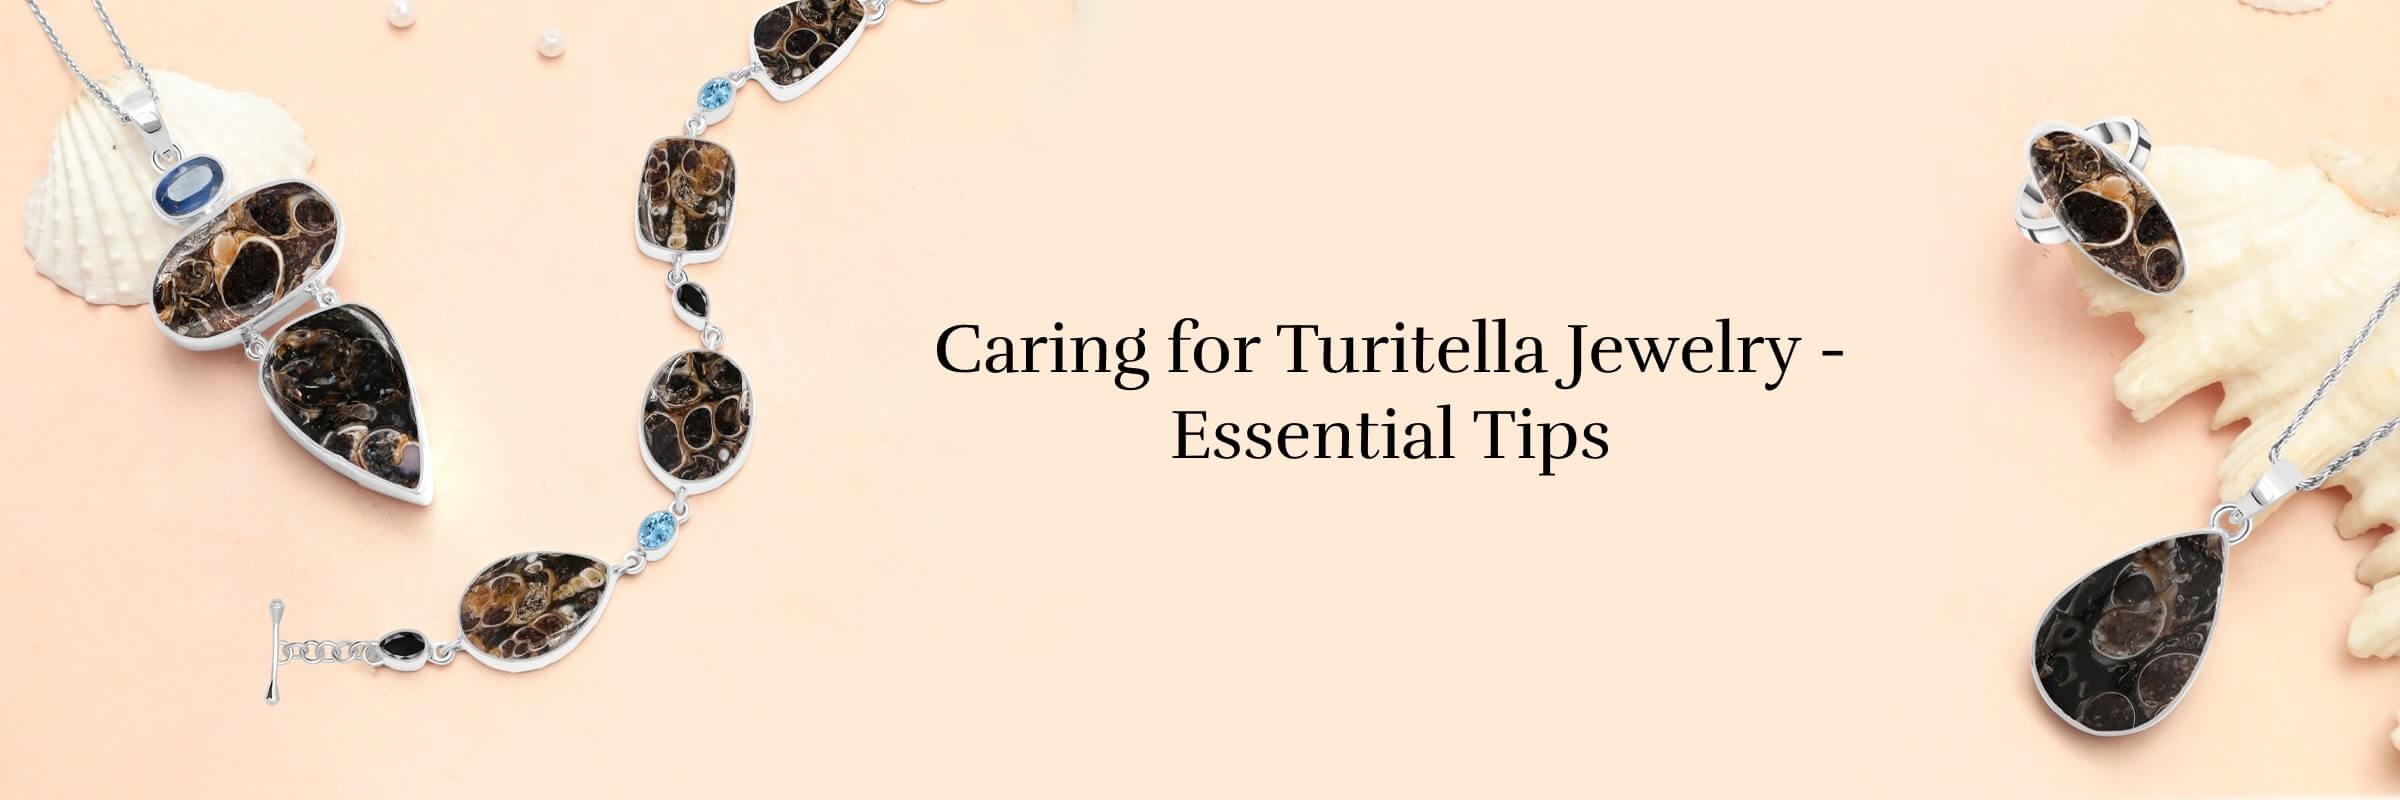 How To Care For Your Turitella Jewelry?